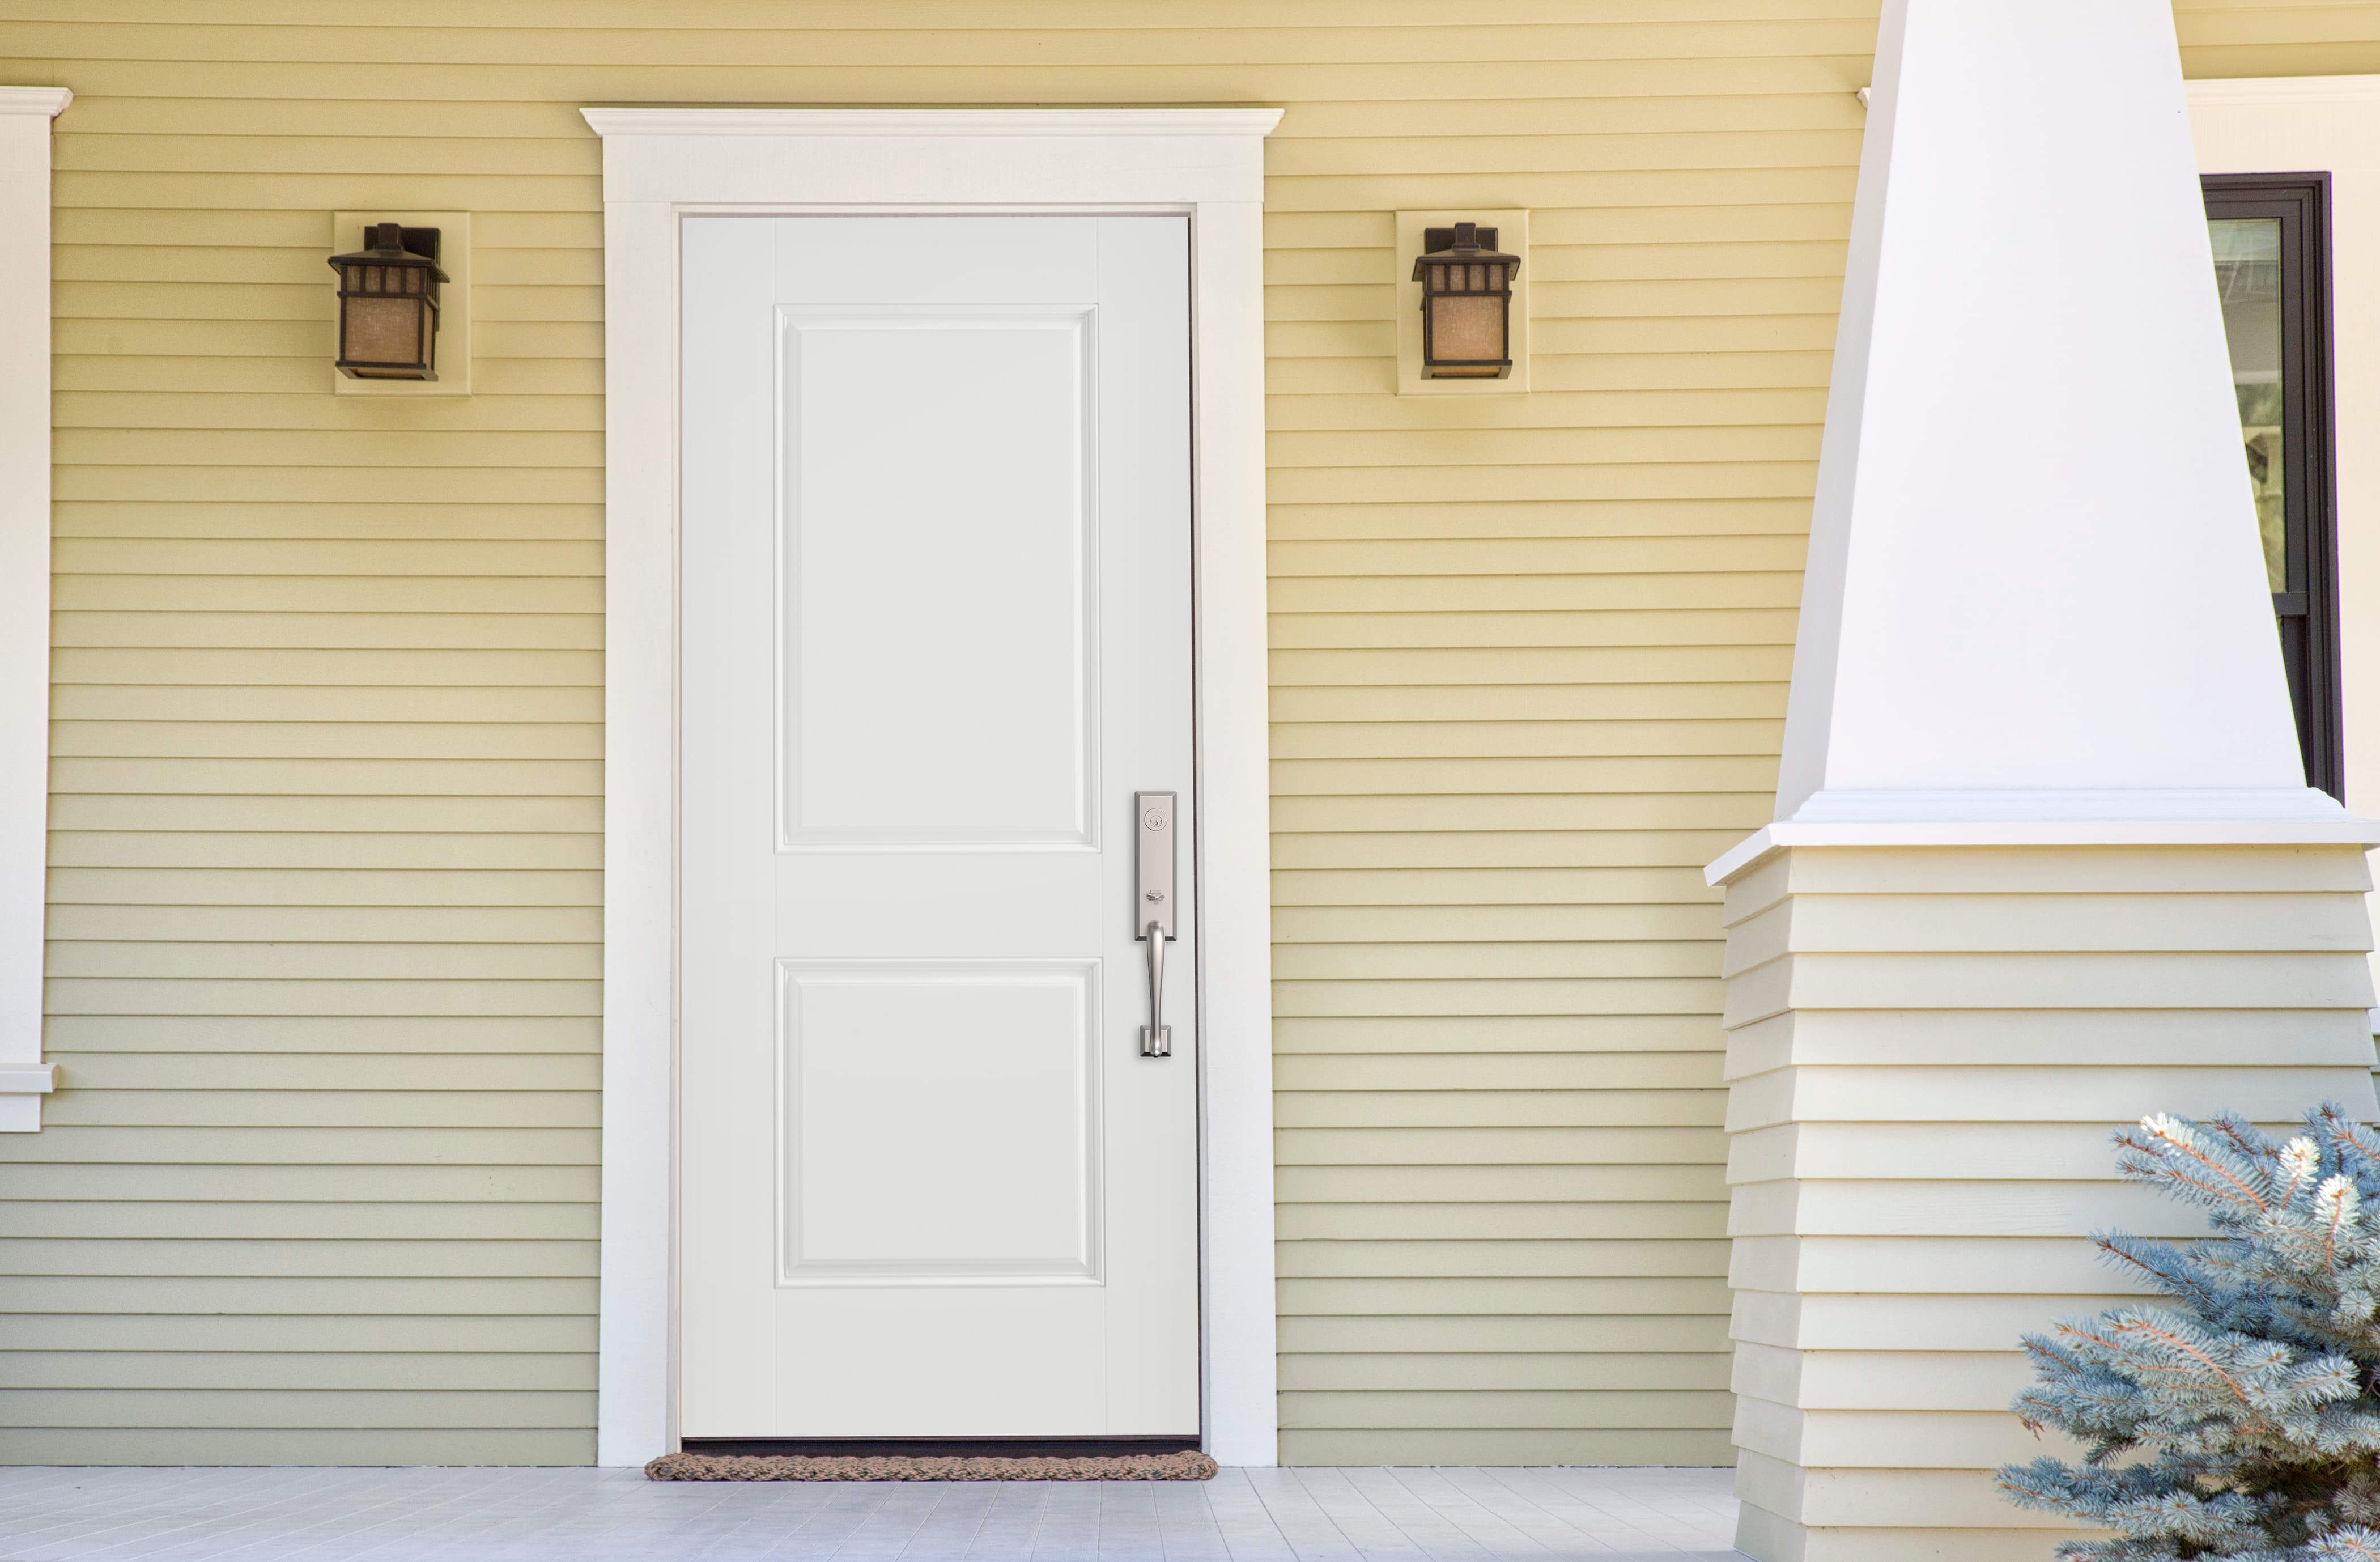 Stylish steel door surrounded by traditional trim and clapboard siding